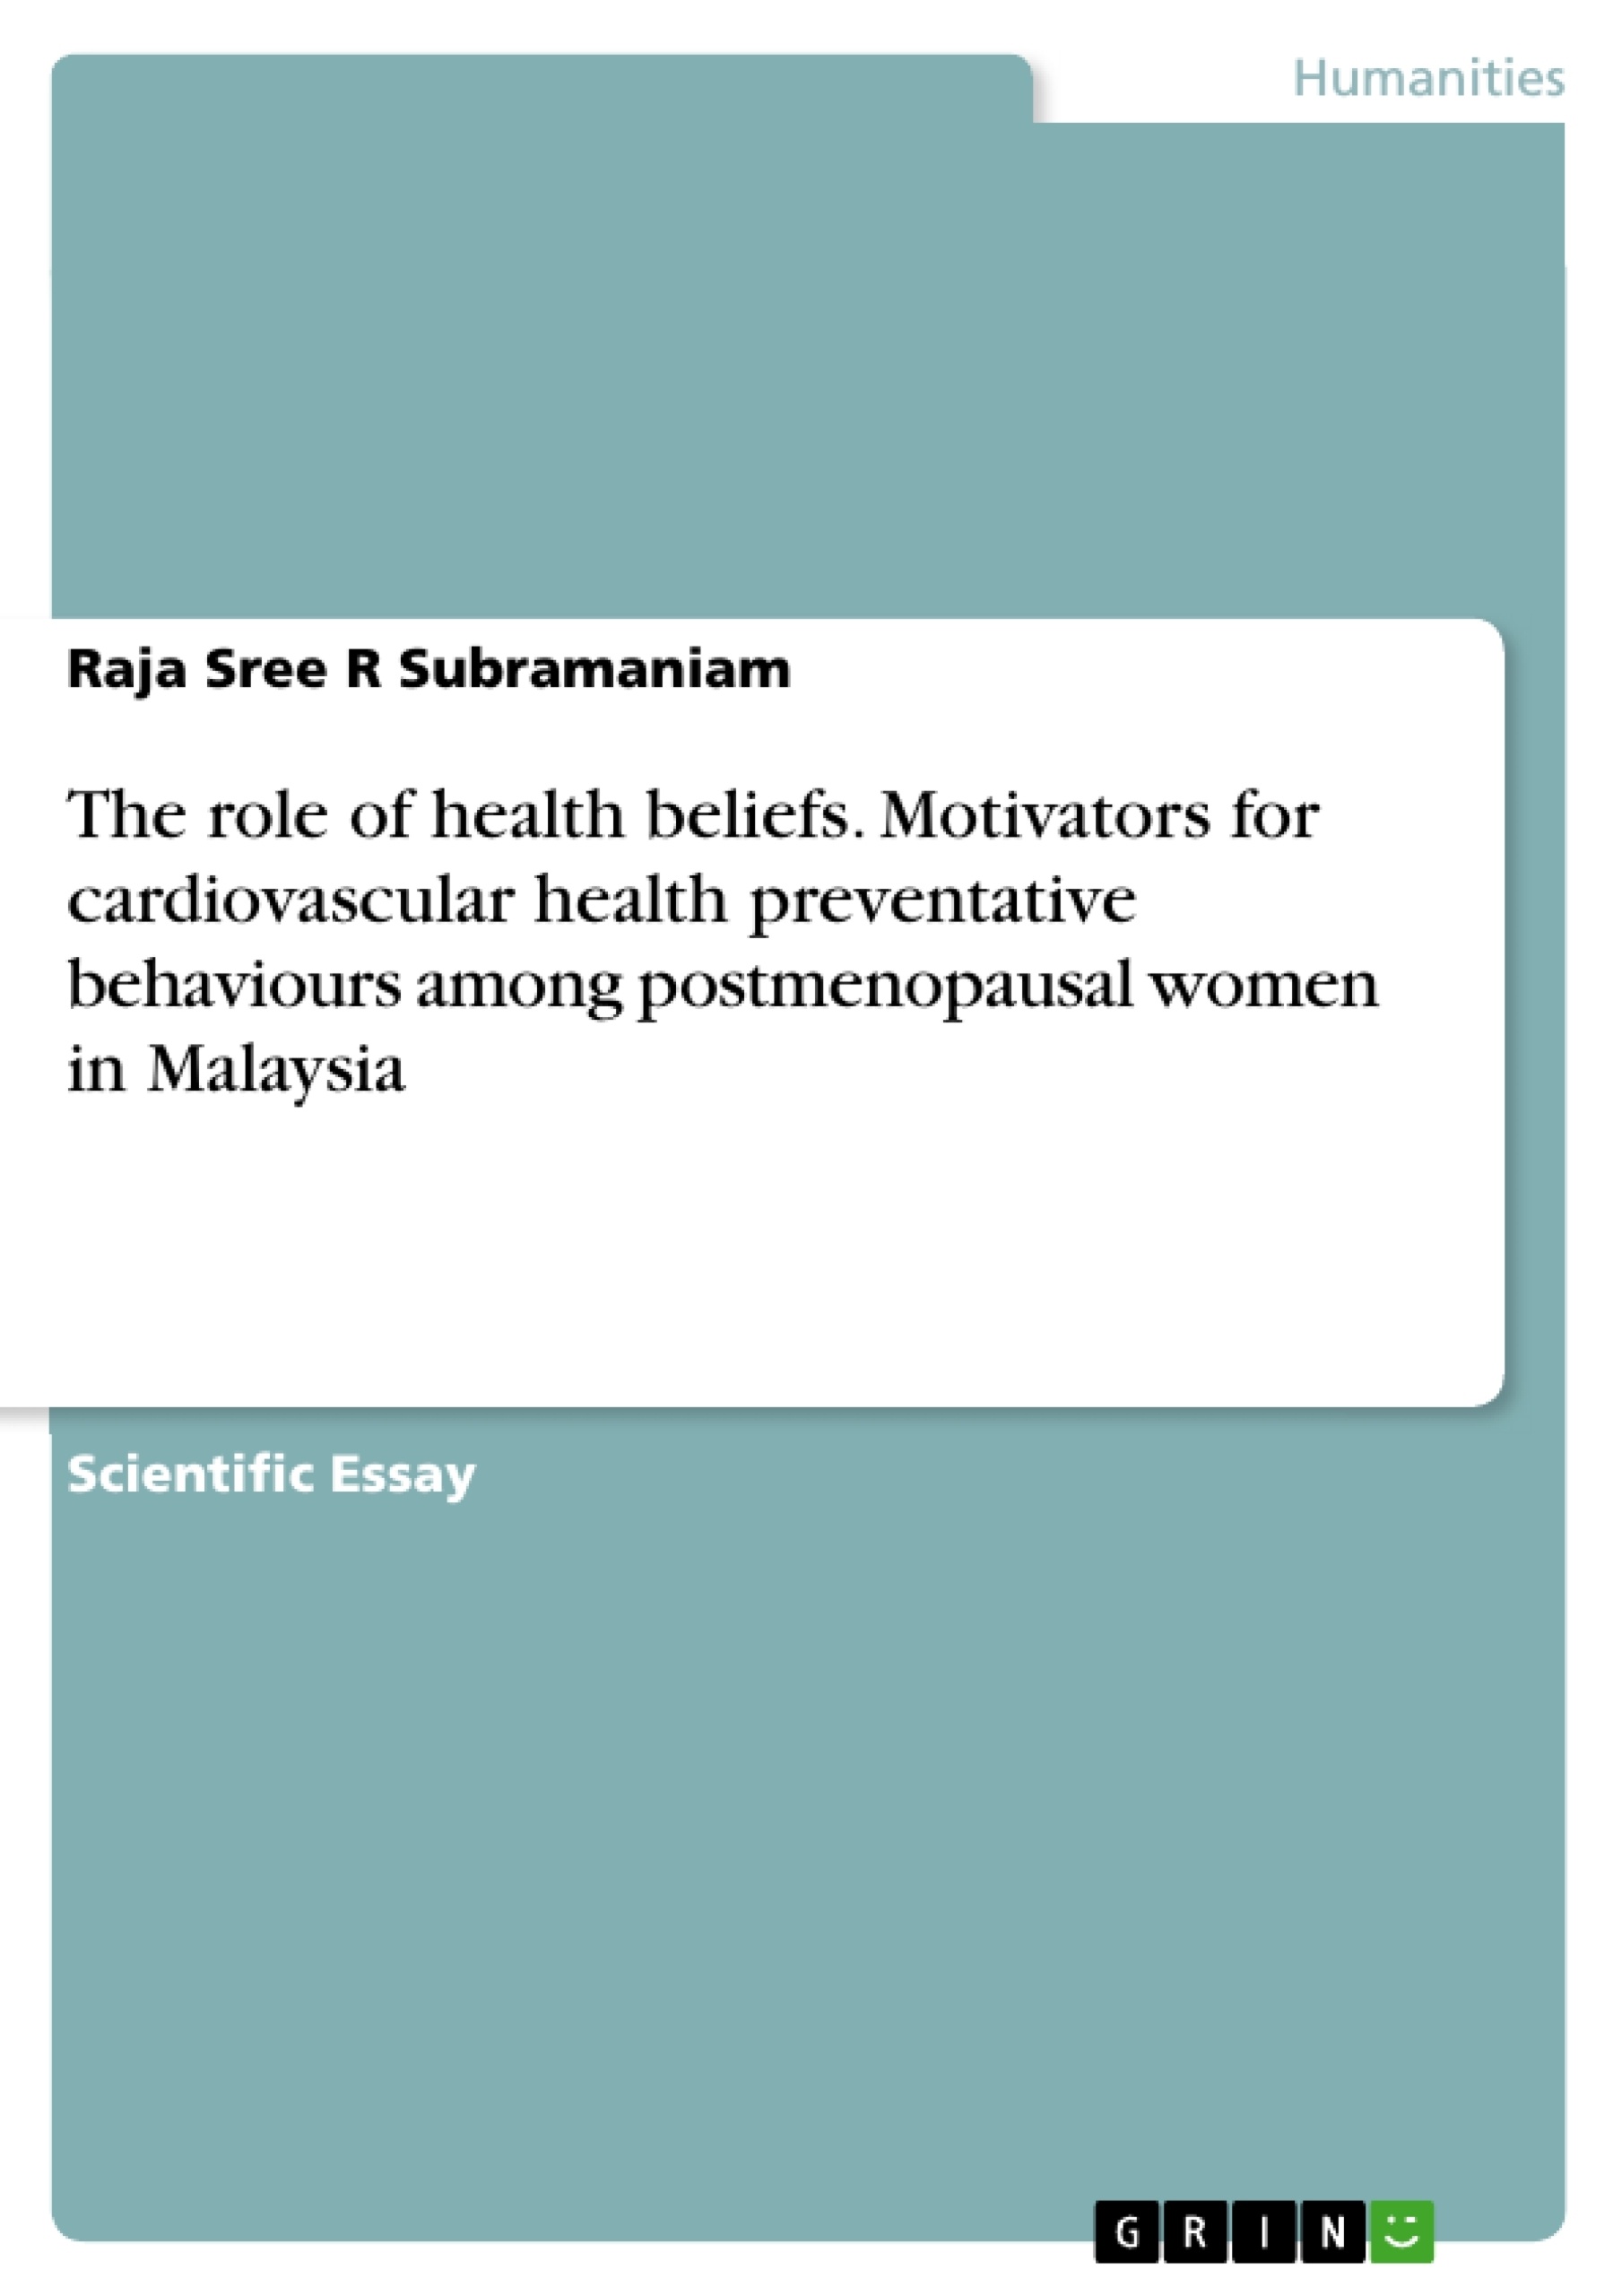 Title: The role of health beliefs.  Motivators for cardiovascular health preventative behaviours among postmenopausal women in Malaysia